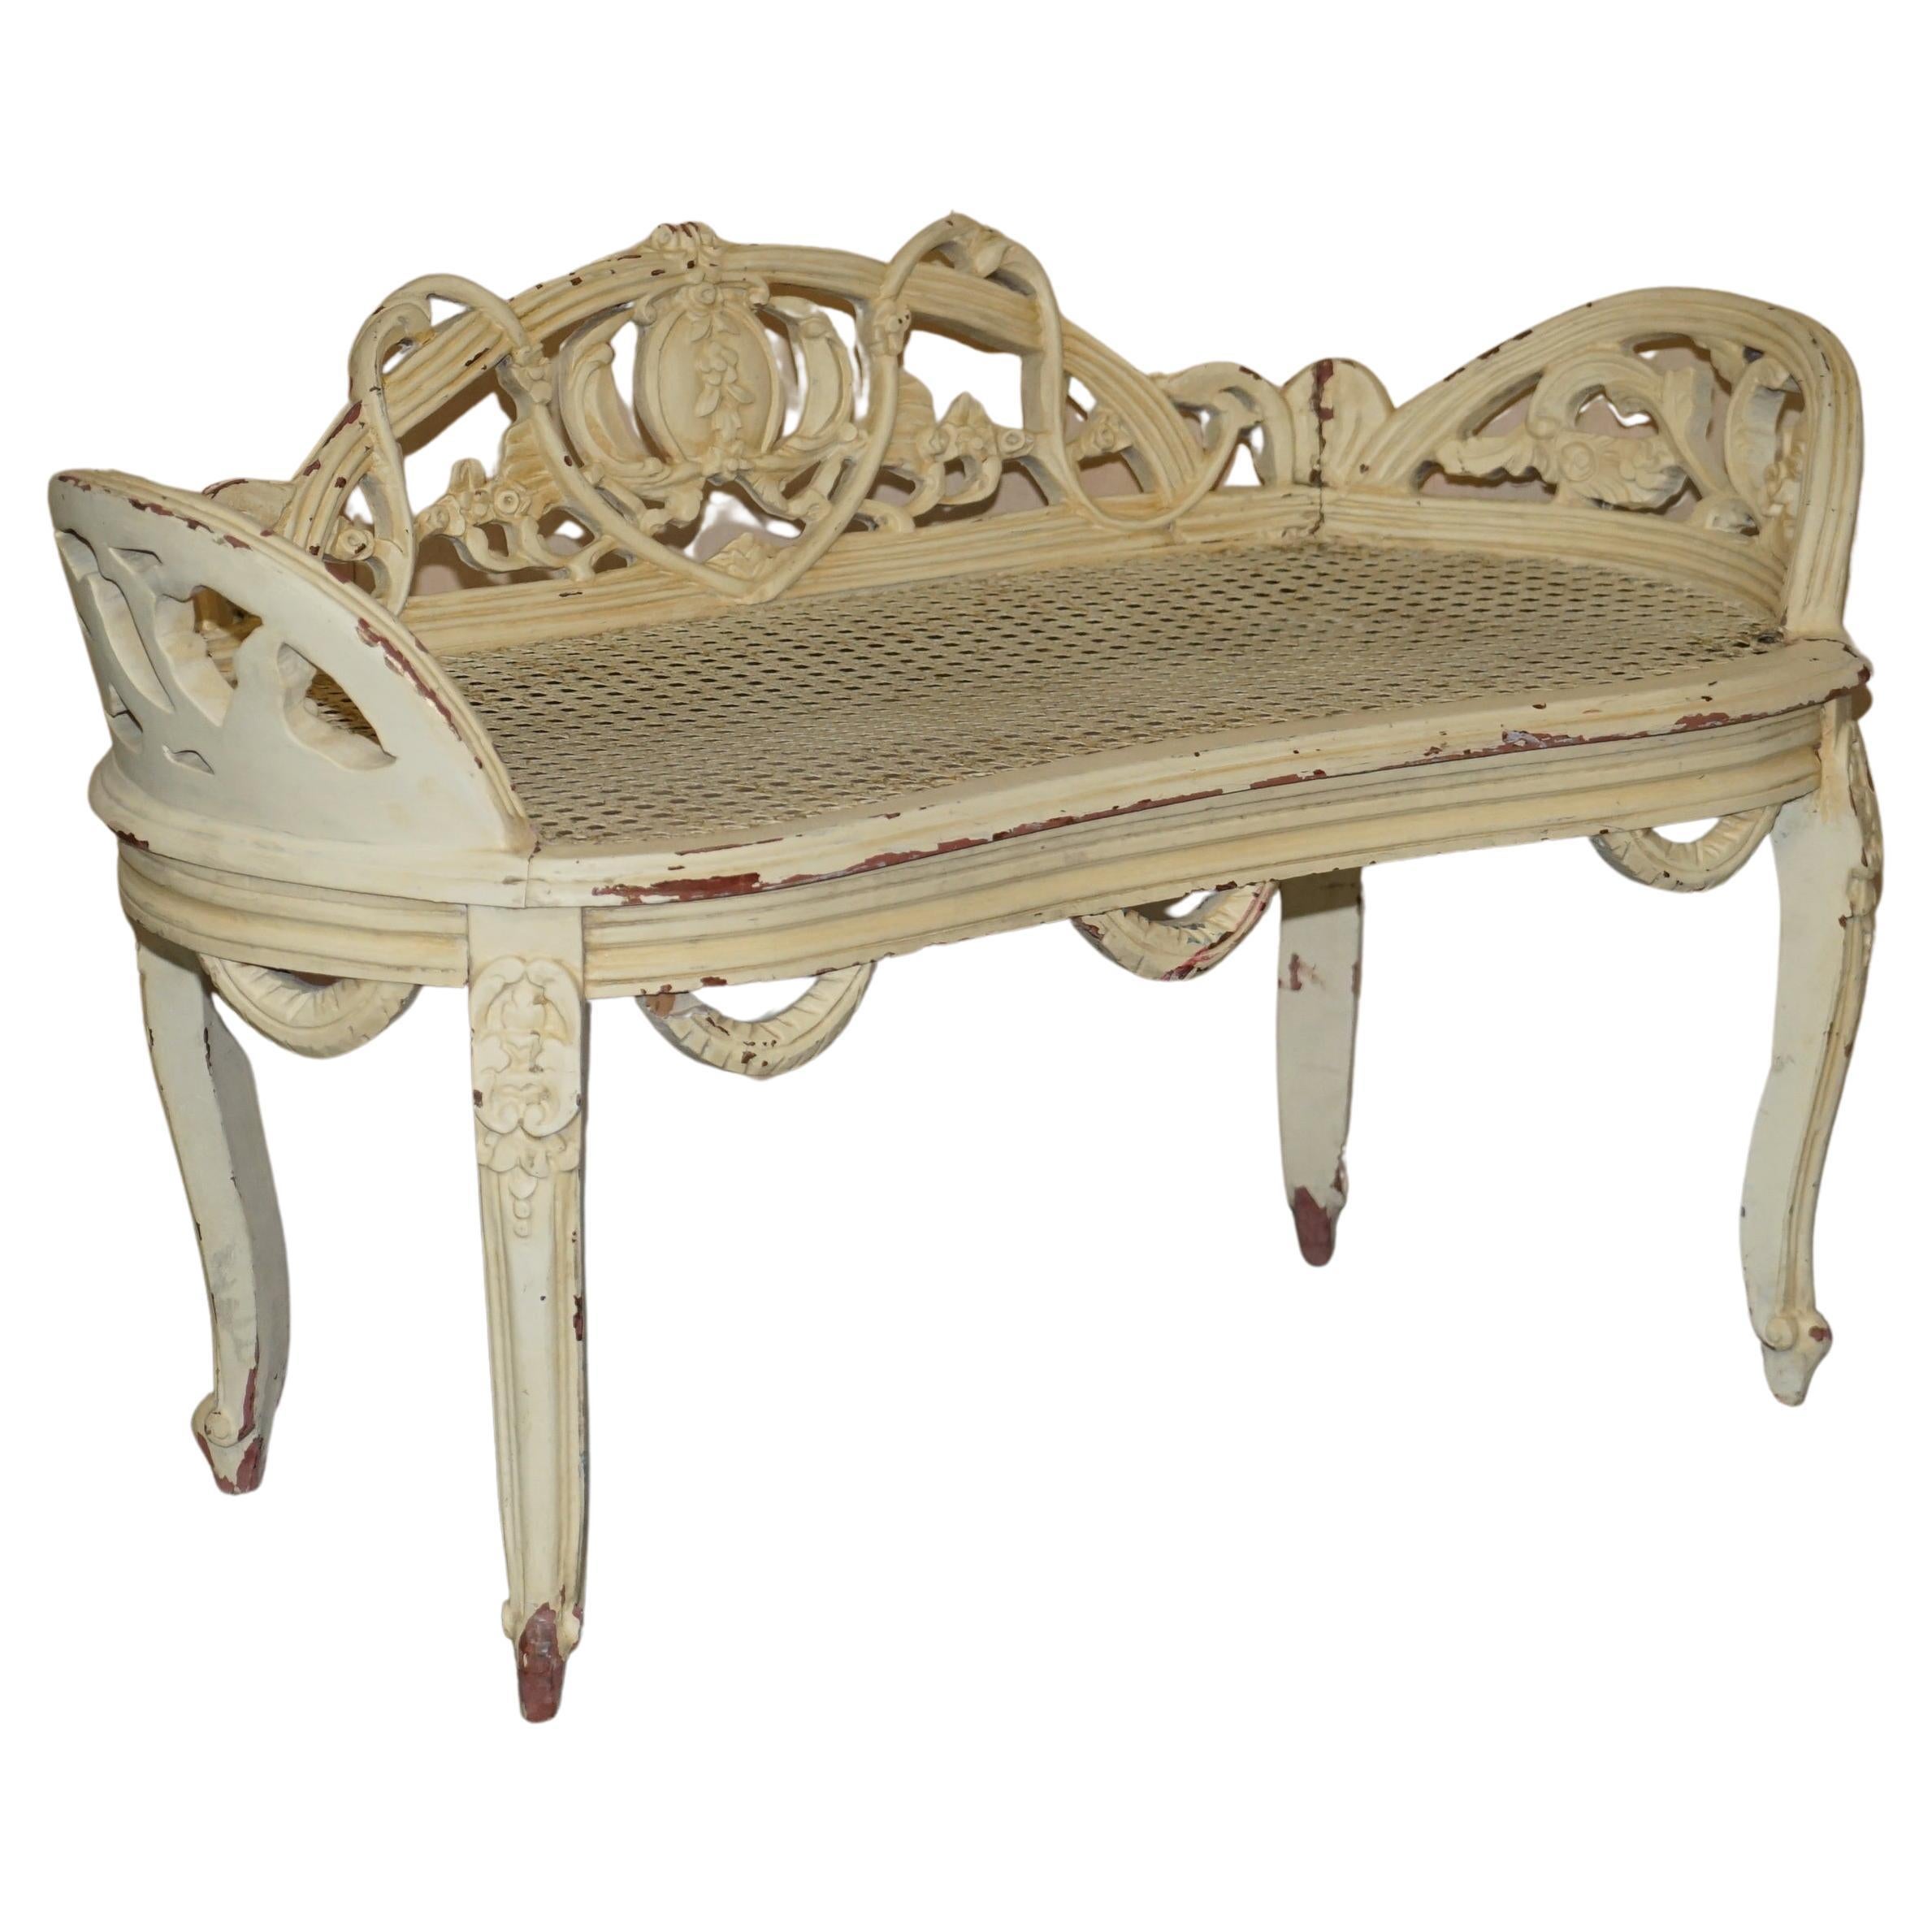 Antique French Shabby Chic Bergere Window Seat Bench Original Paint Finish For Sale